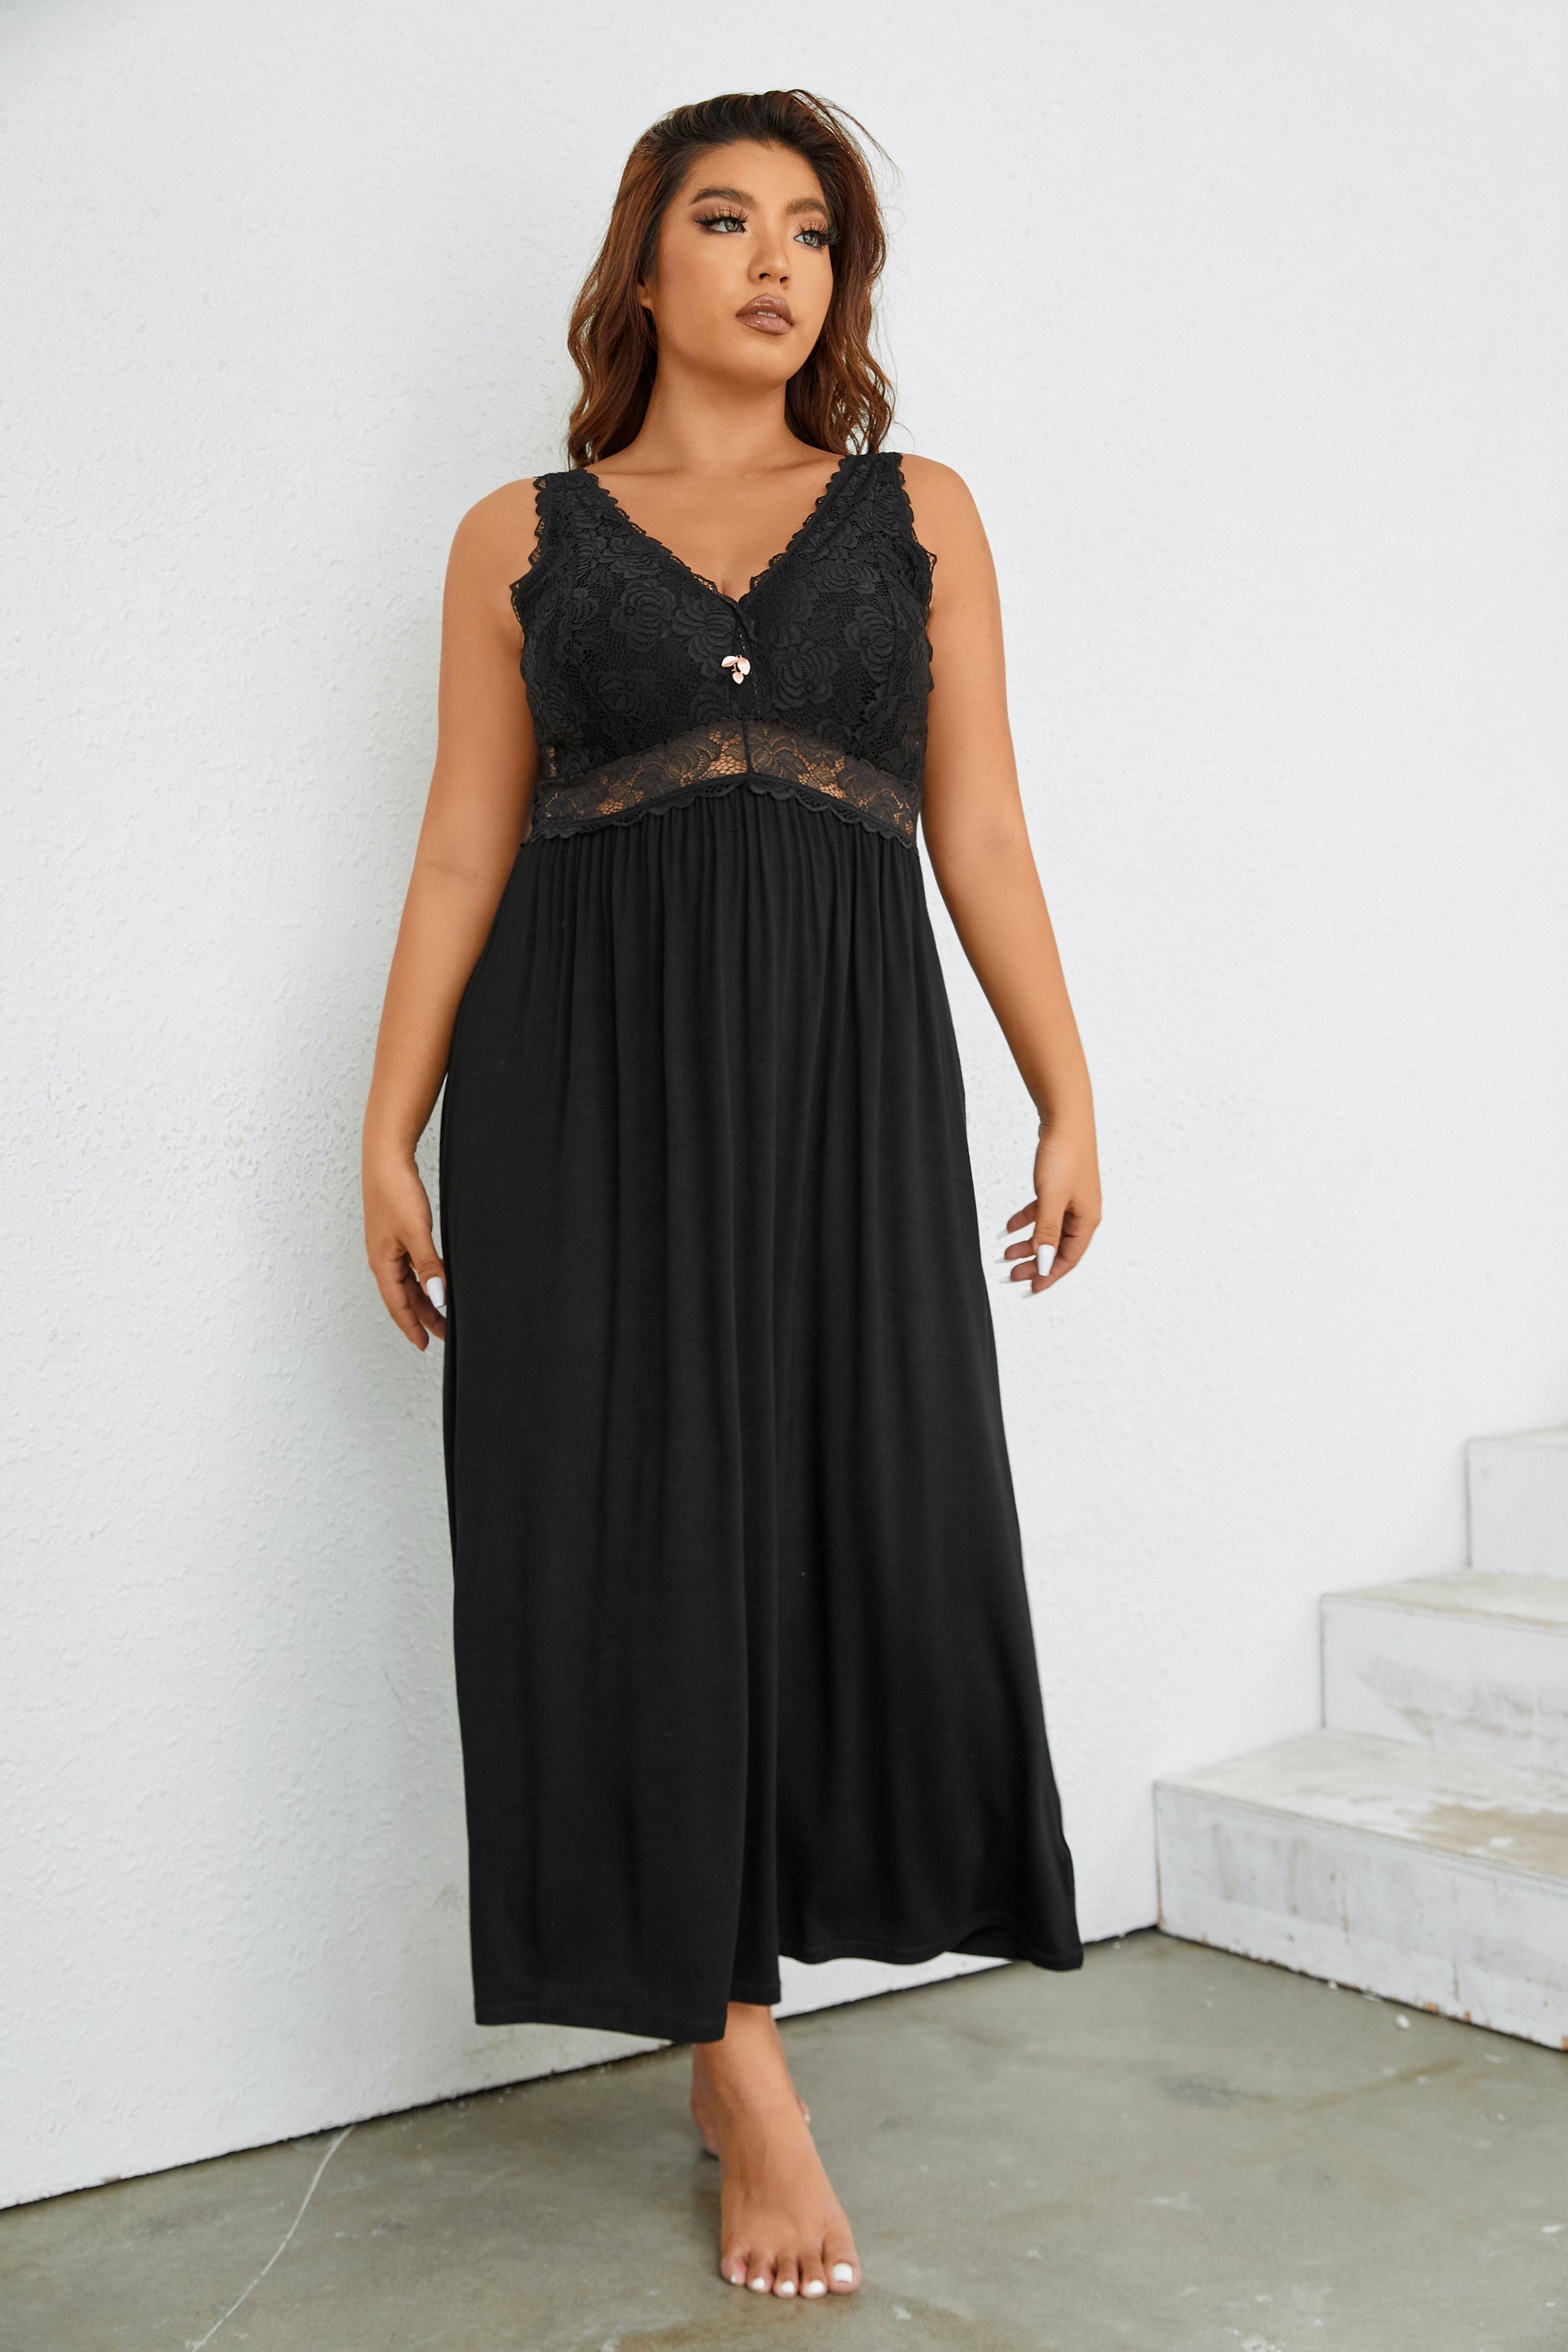 Sexy Lace Jersey Elegant Long Nightgown Chemises Black